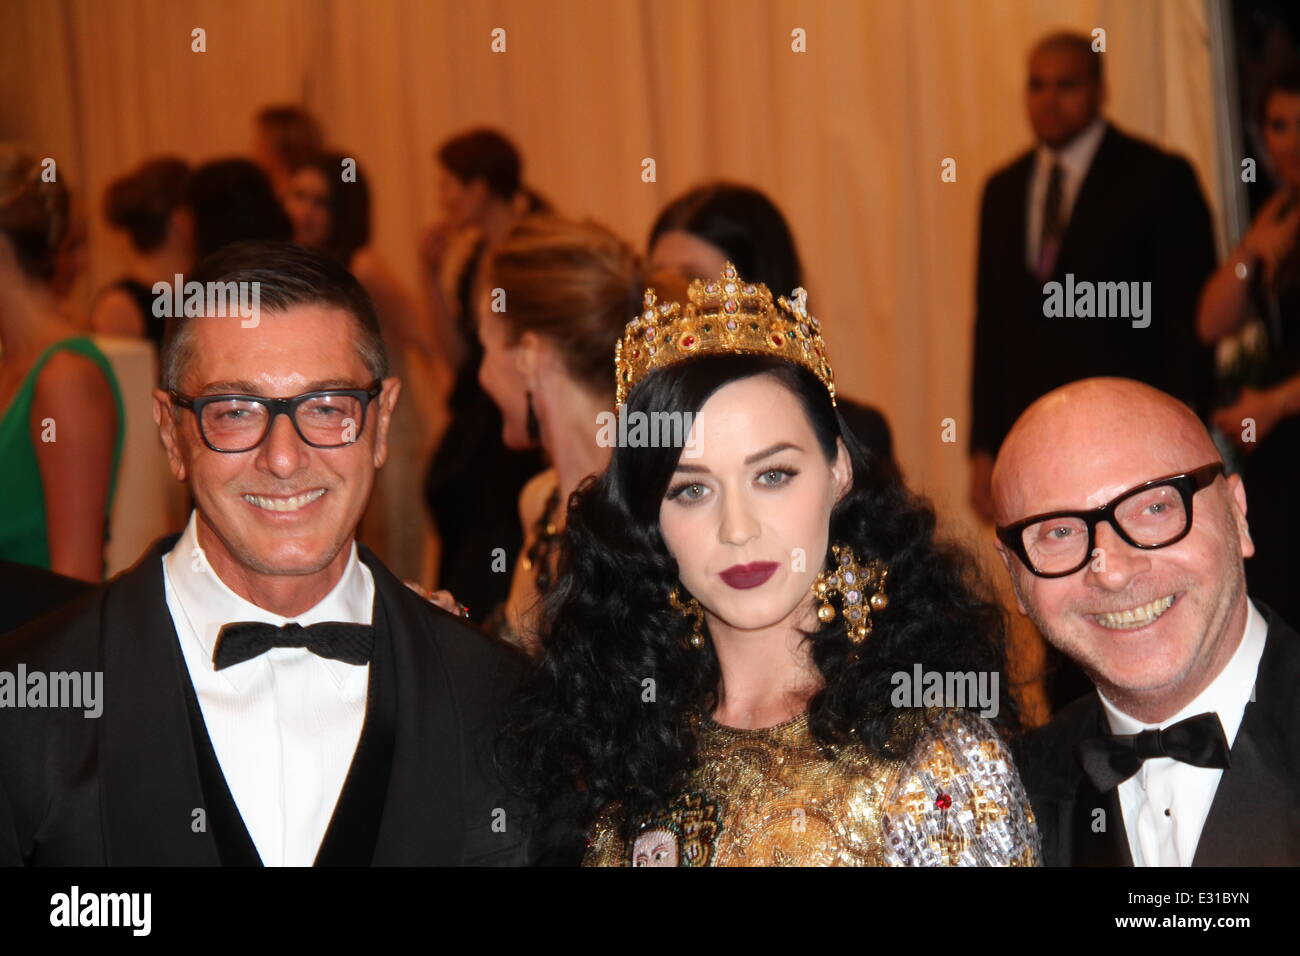 dolce and gabbana founders